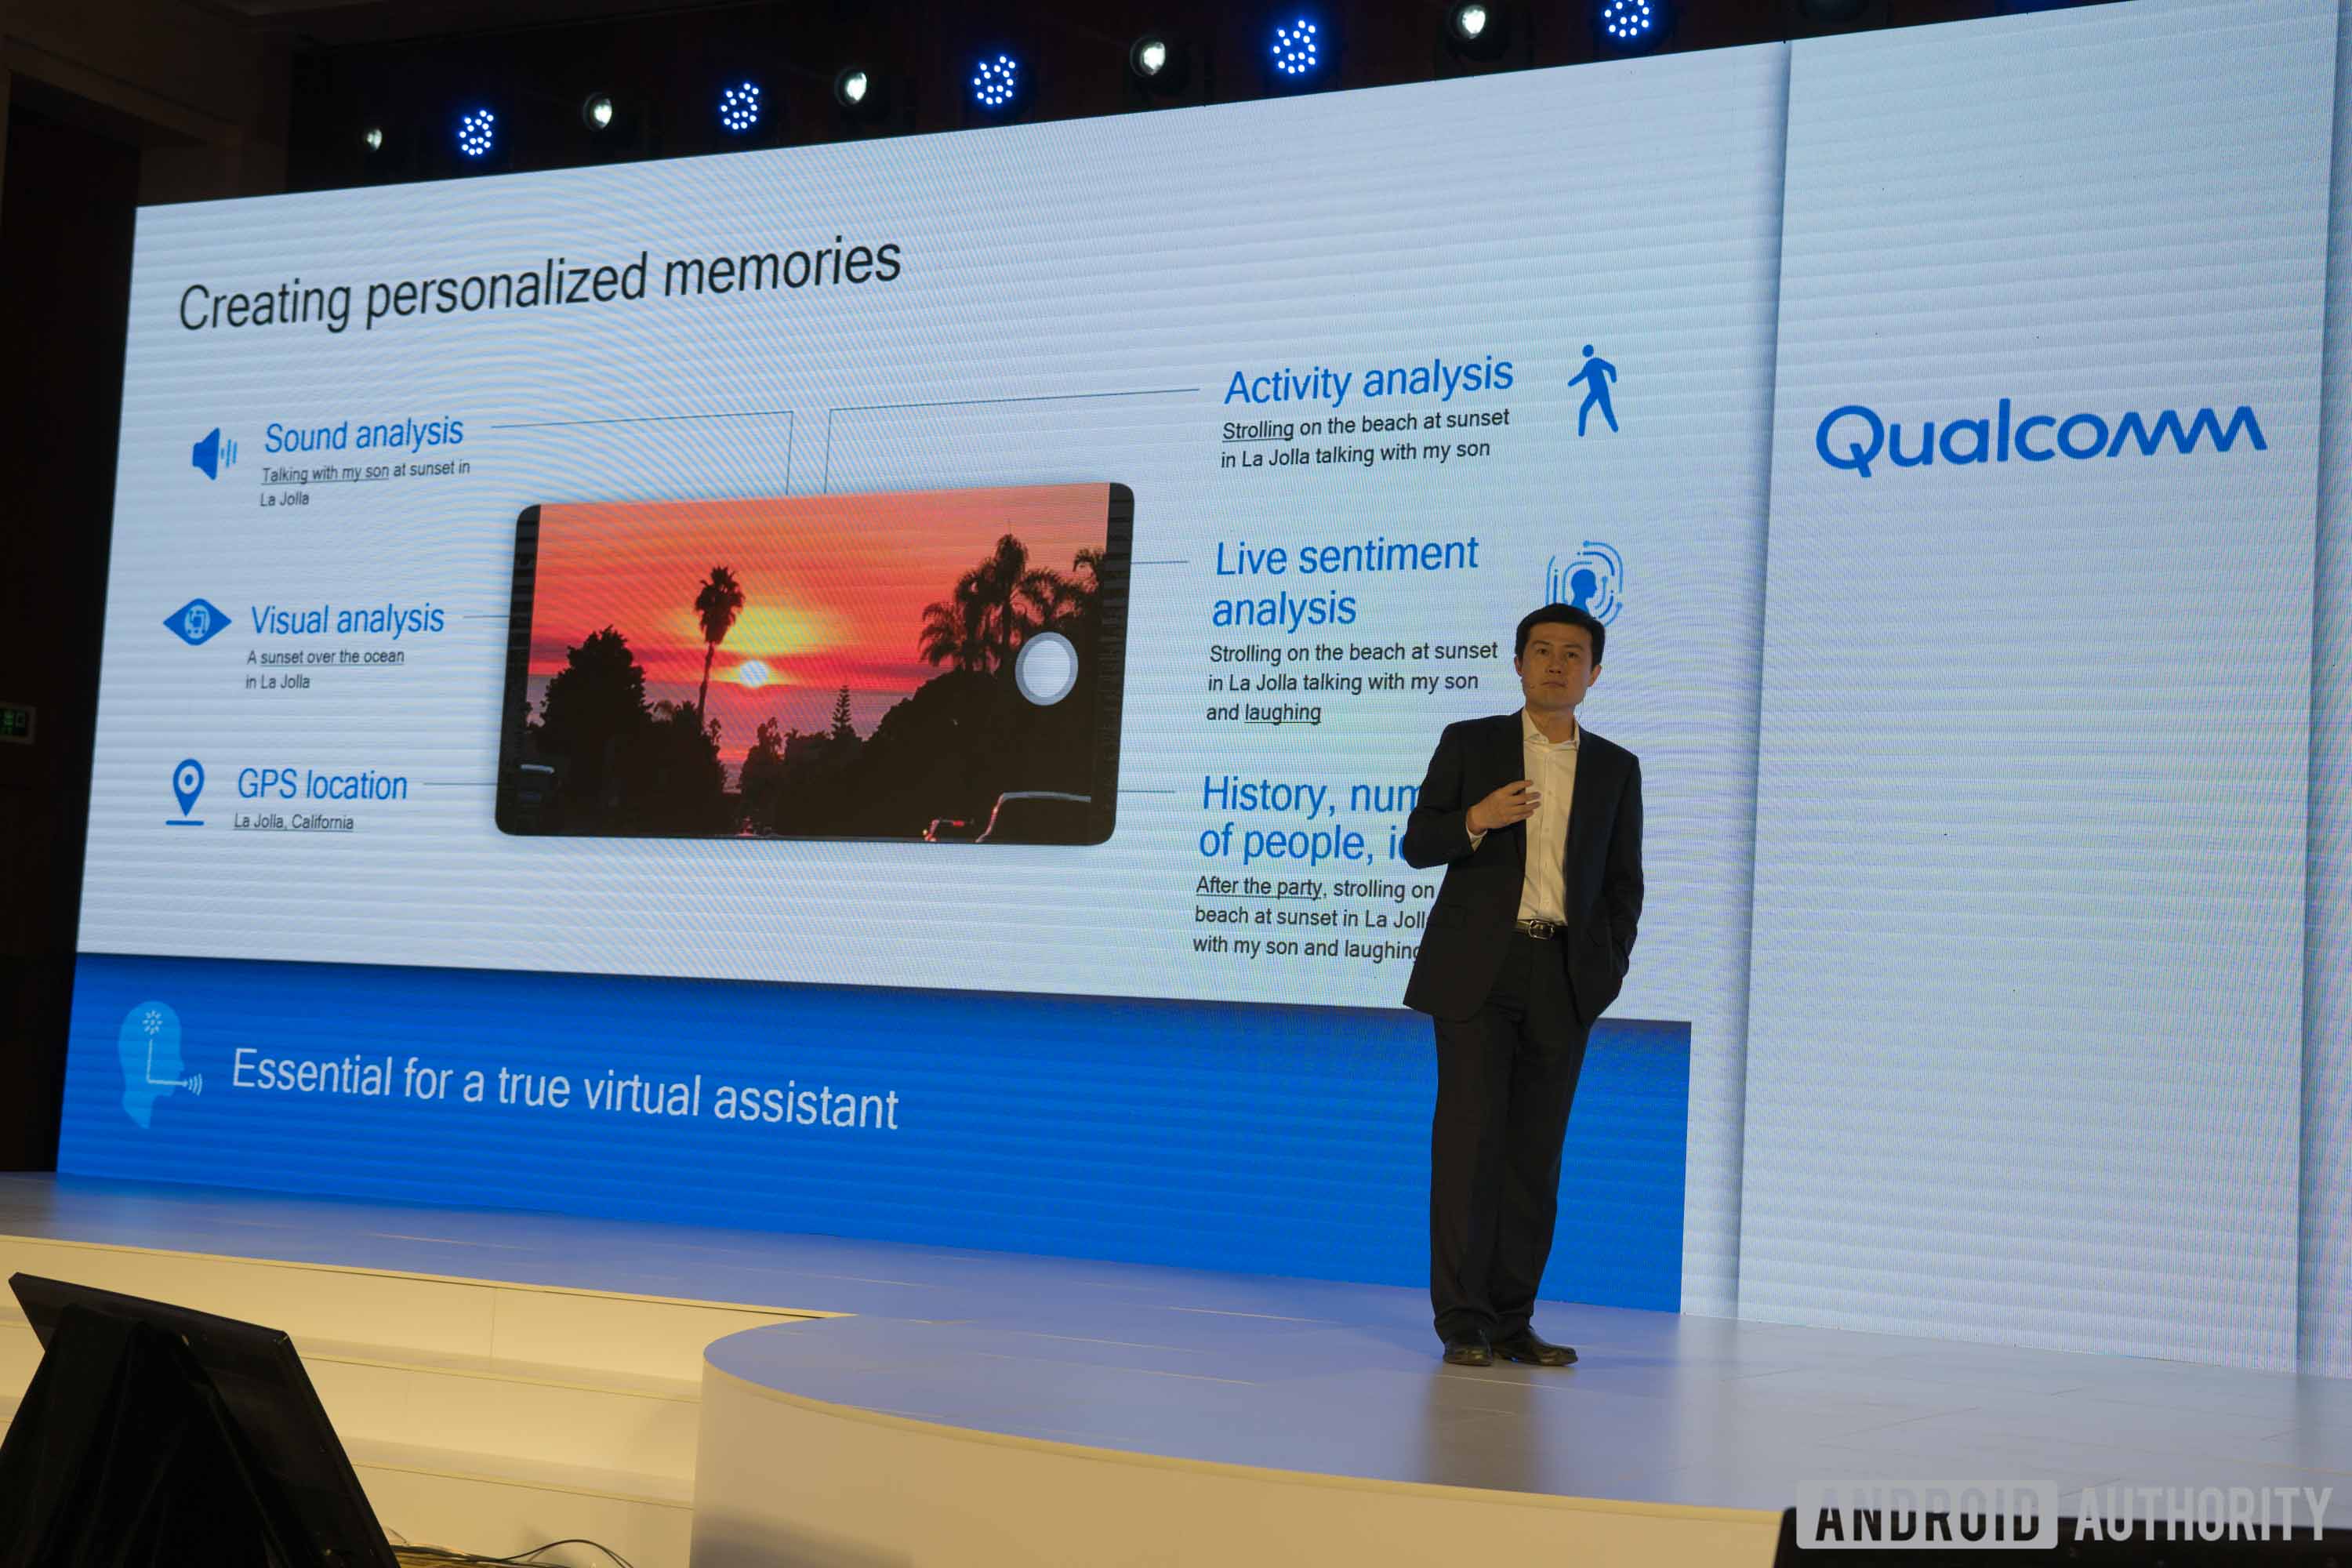 Qualcomm Senior Director of Engineering Jilei Hou shares a concept of being able to capture memories rather than photos